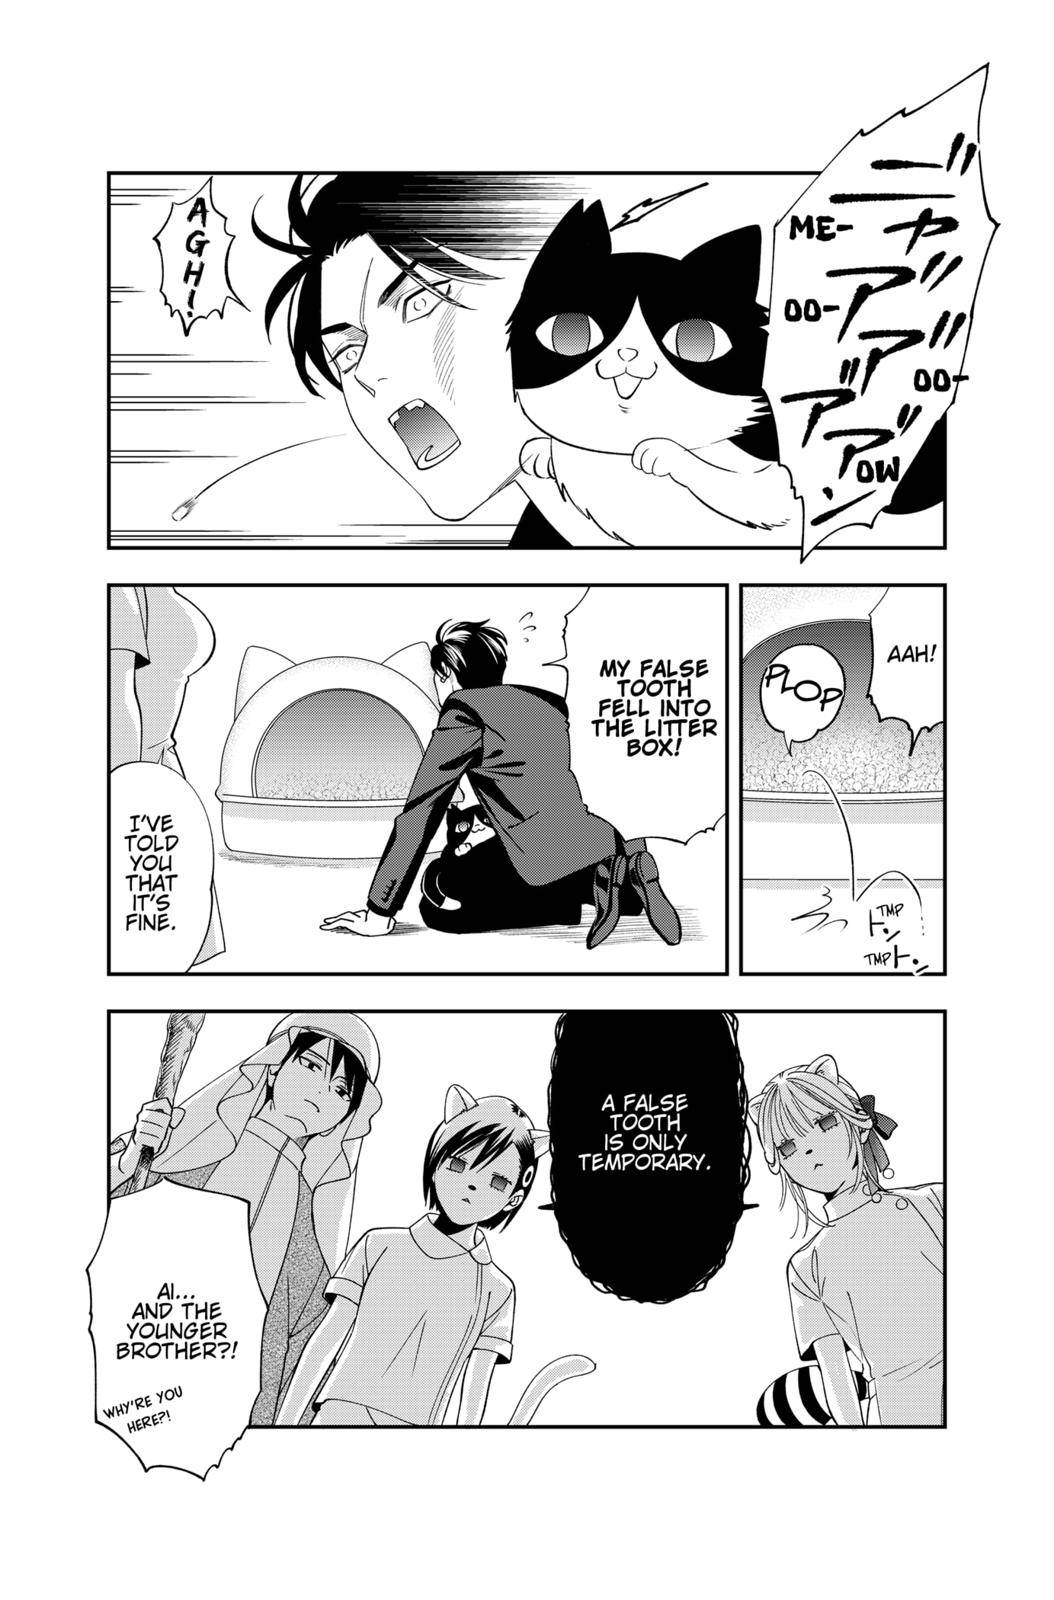 Dentist-San, Your Boobs Are Touching Me! - chapter 15.5 - #2